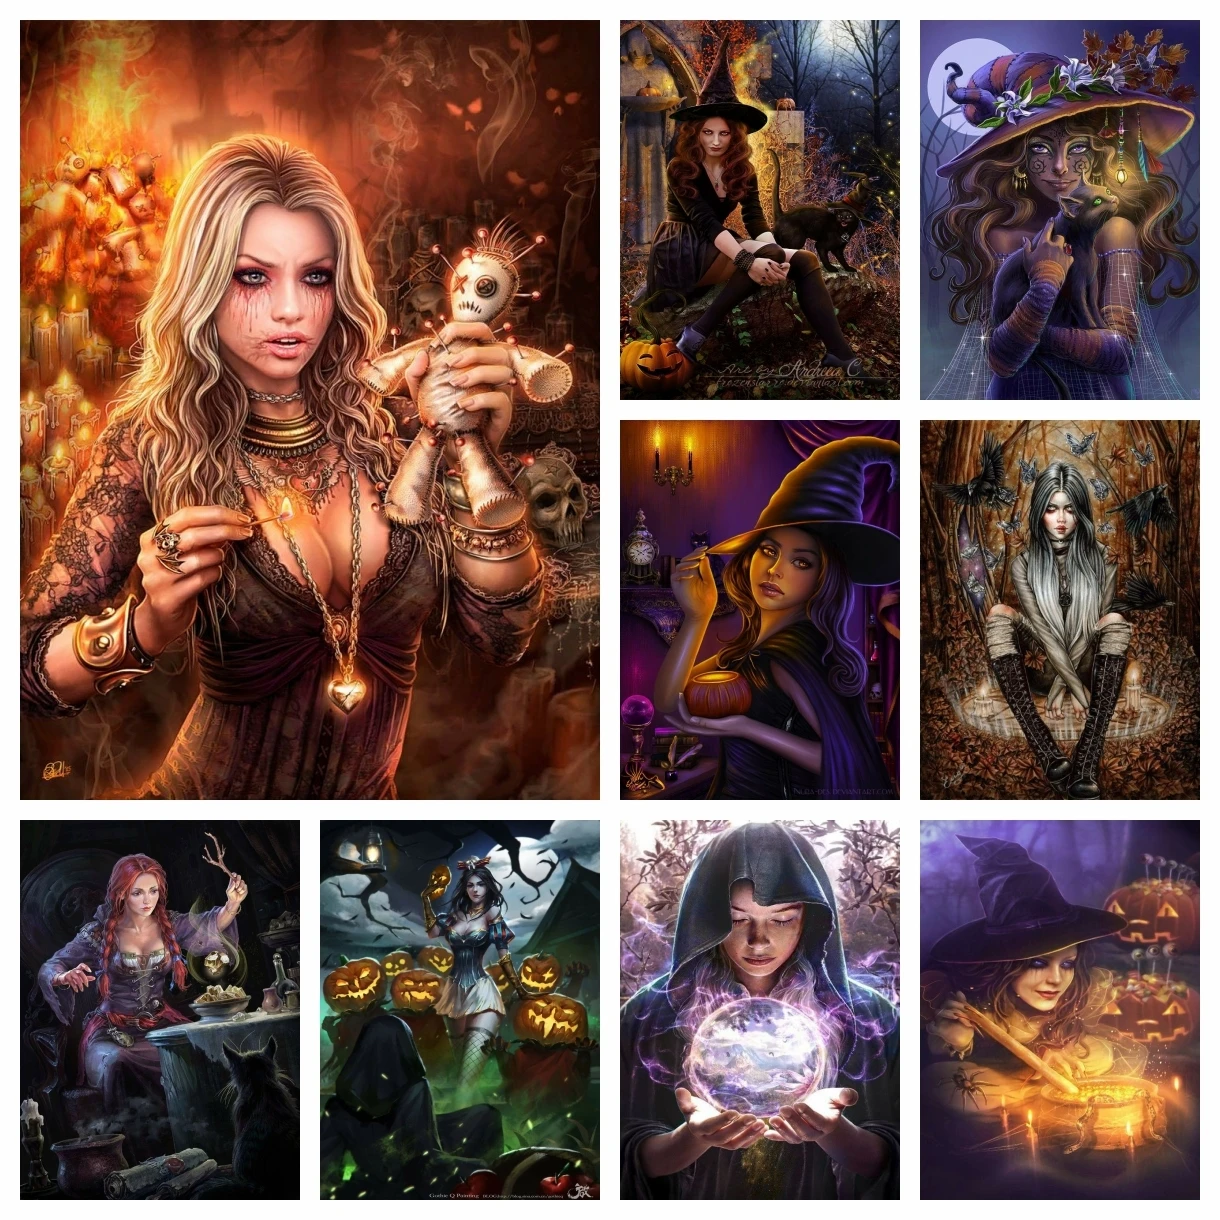 5D DIY Diamond Painting Magic Witch Full Drill Cross Stitch Kits Mosaic Rhinestone Picture Embroidery Living Room Home Decor